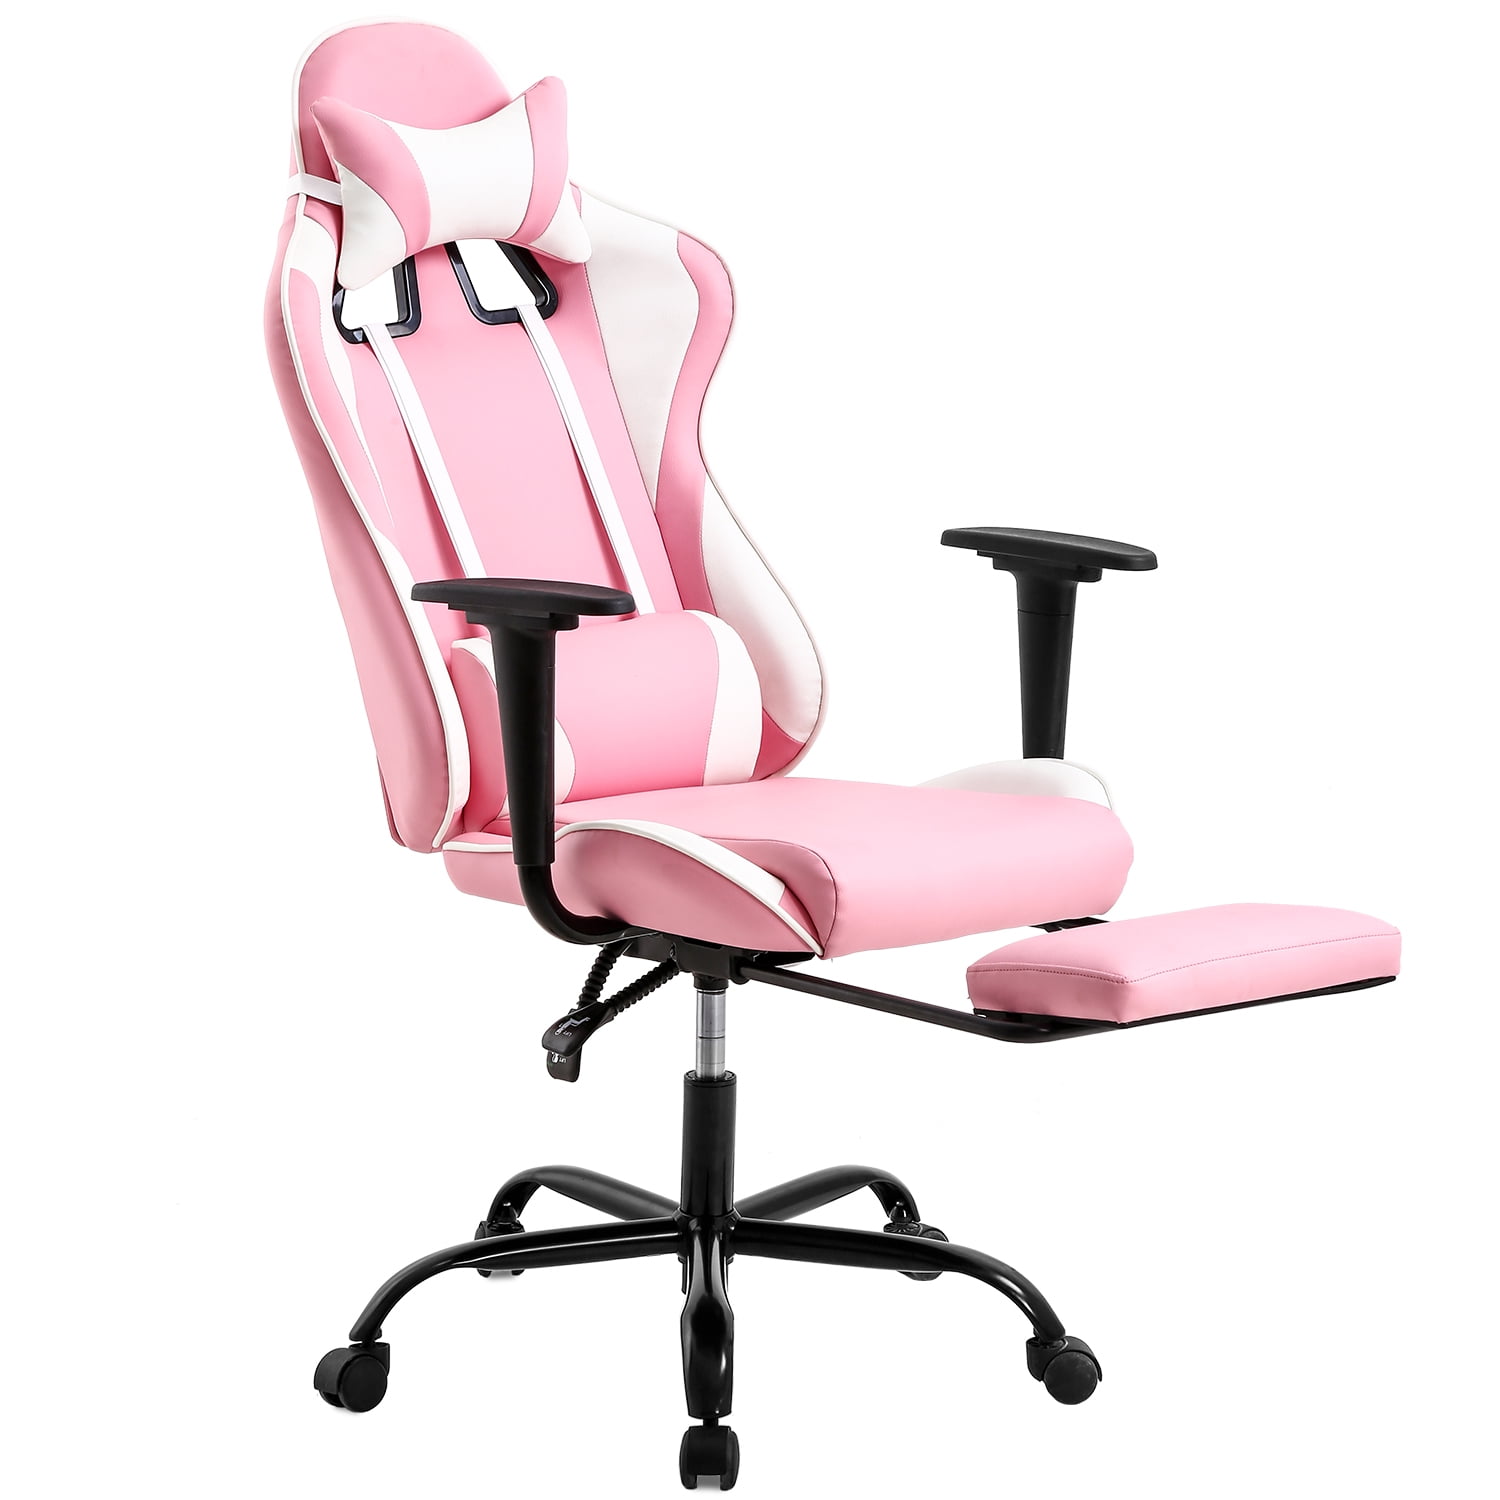 PC Gaming Chair Desk Chair Ergonomic Office Chair Executive High Back